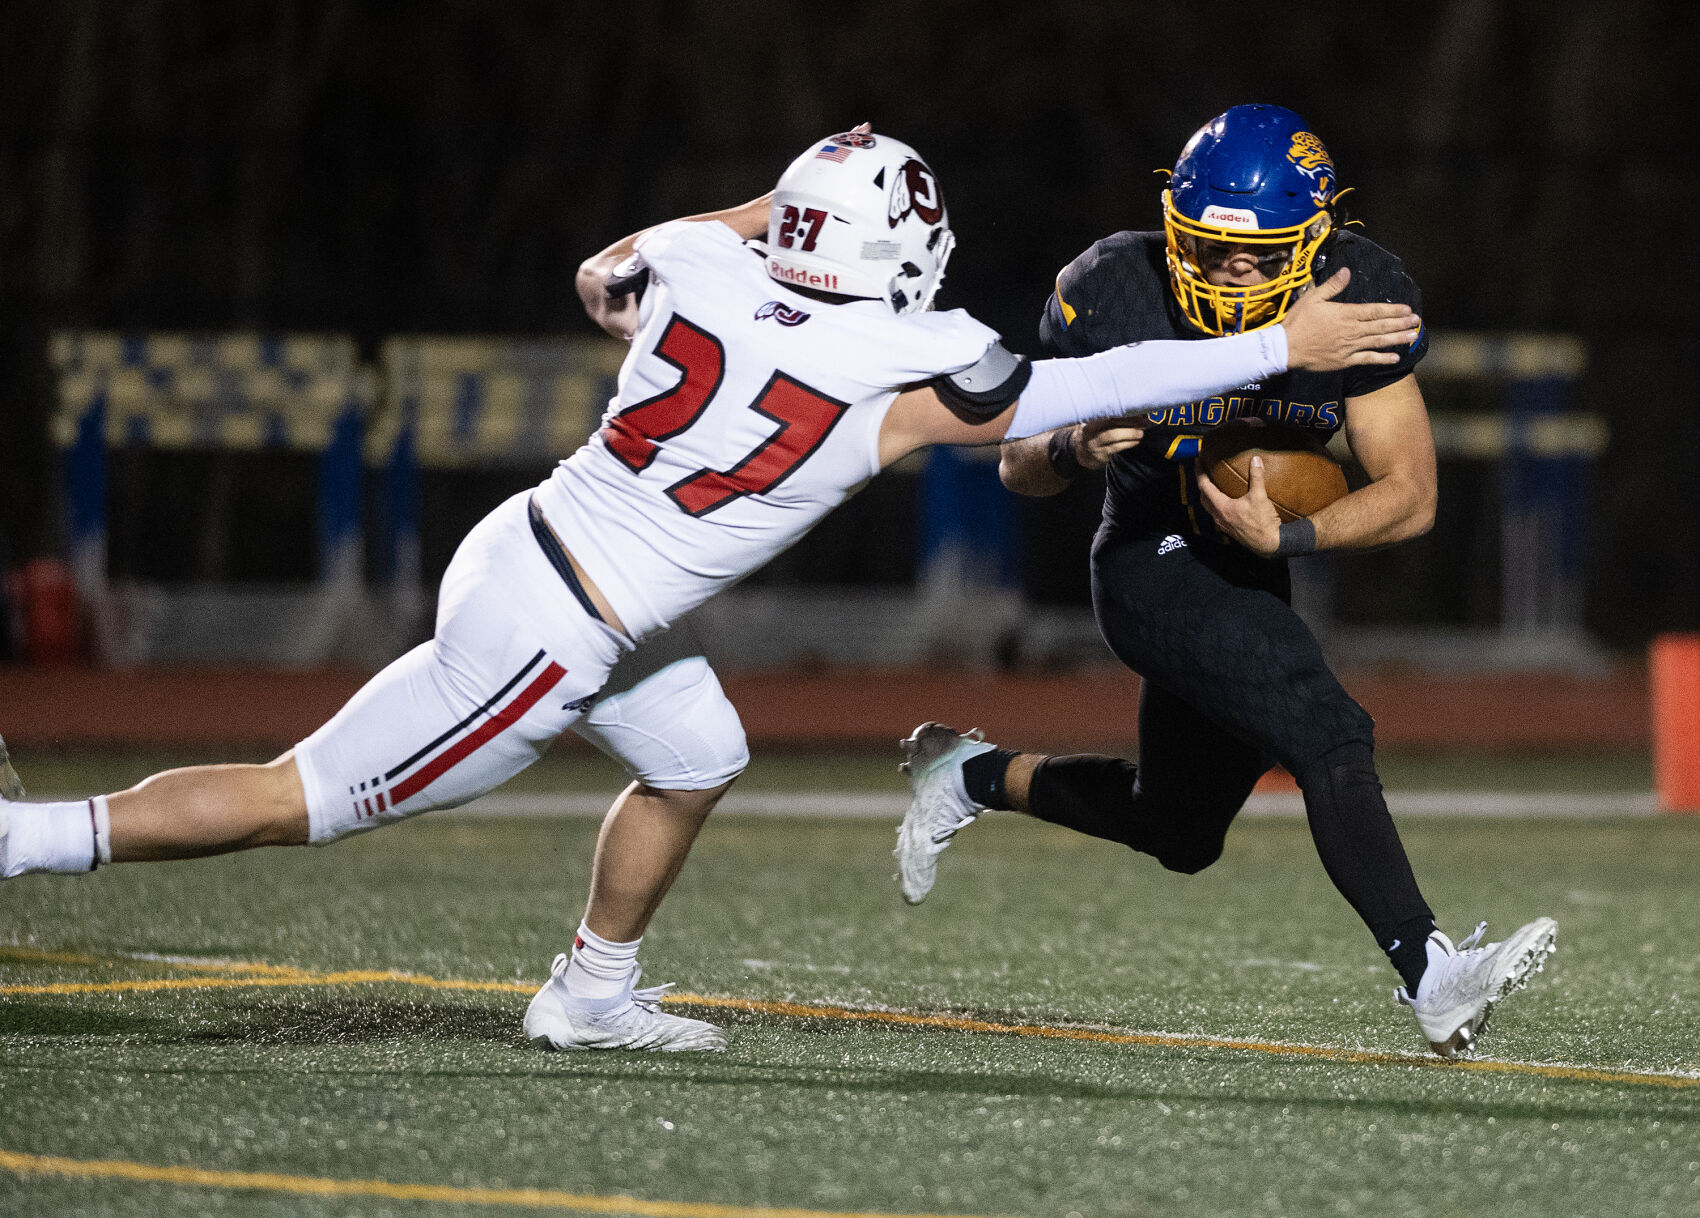 Jackson dominates Seckman in Class 6 District 1 football title game, winning 55-21